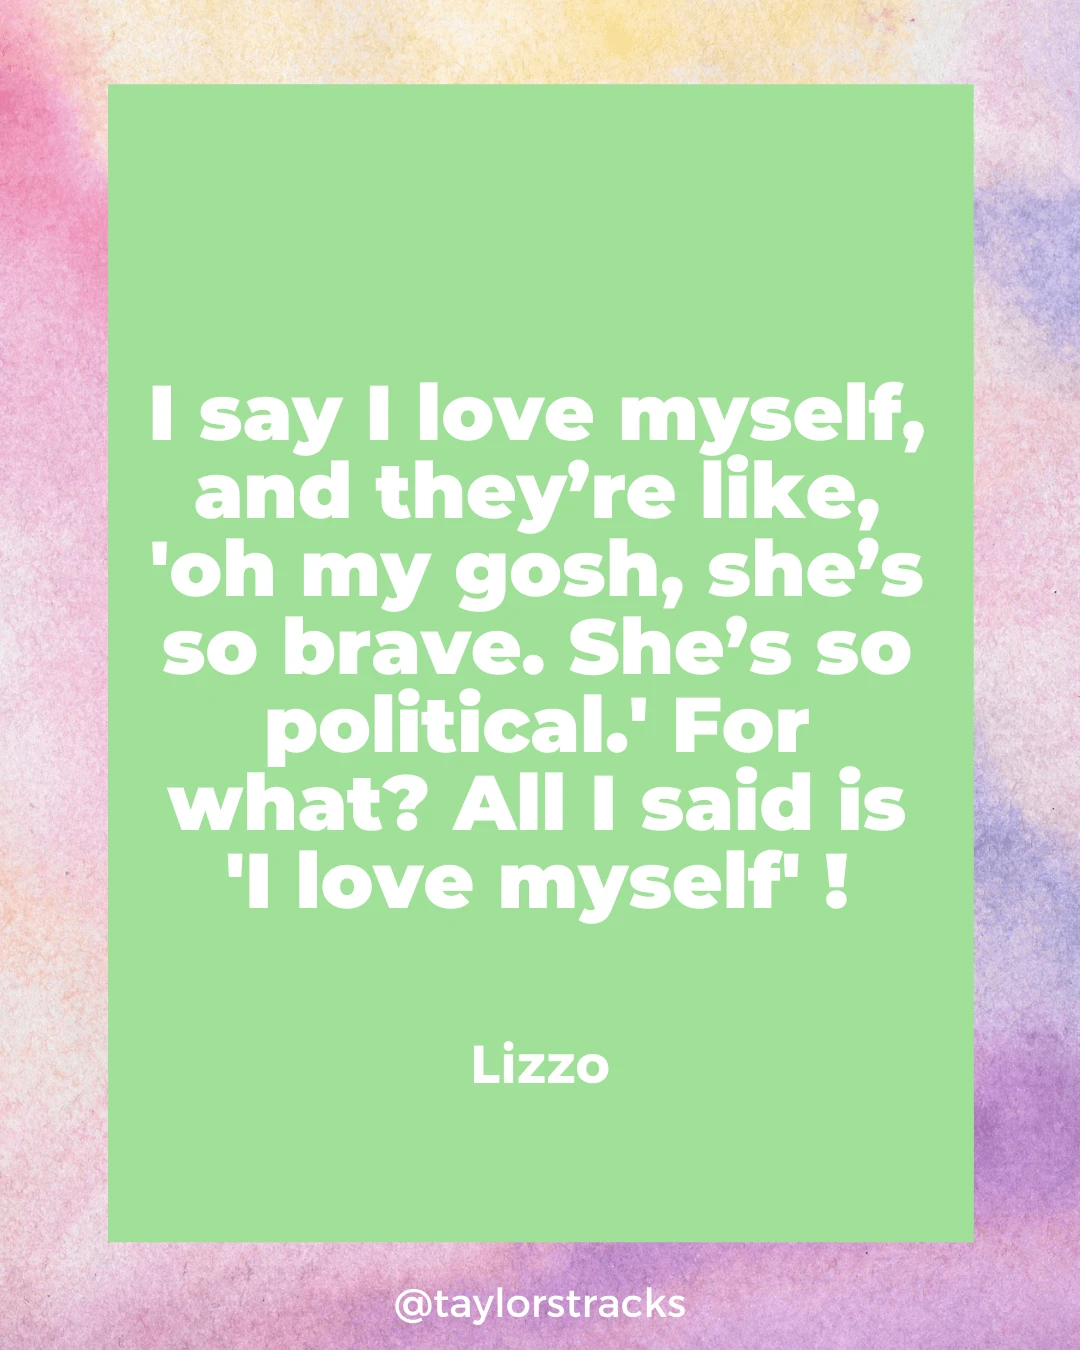 Rethink Your Body Image with These Love Your Body Quotes